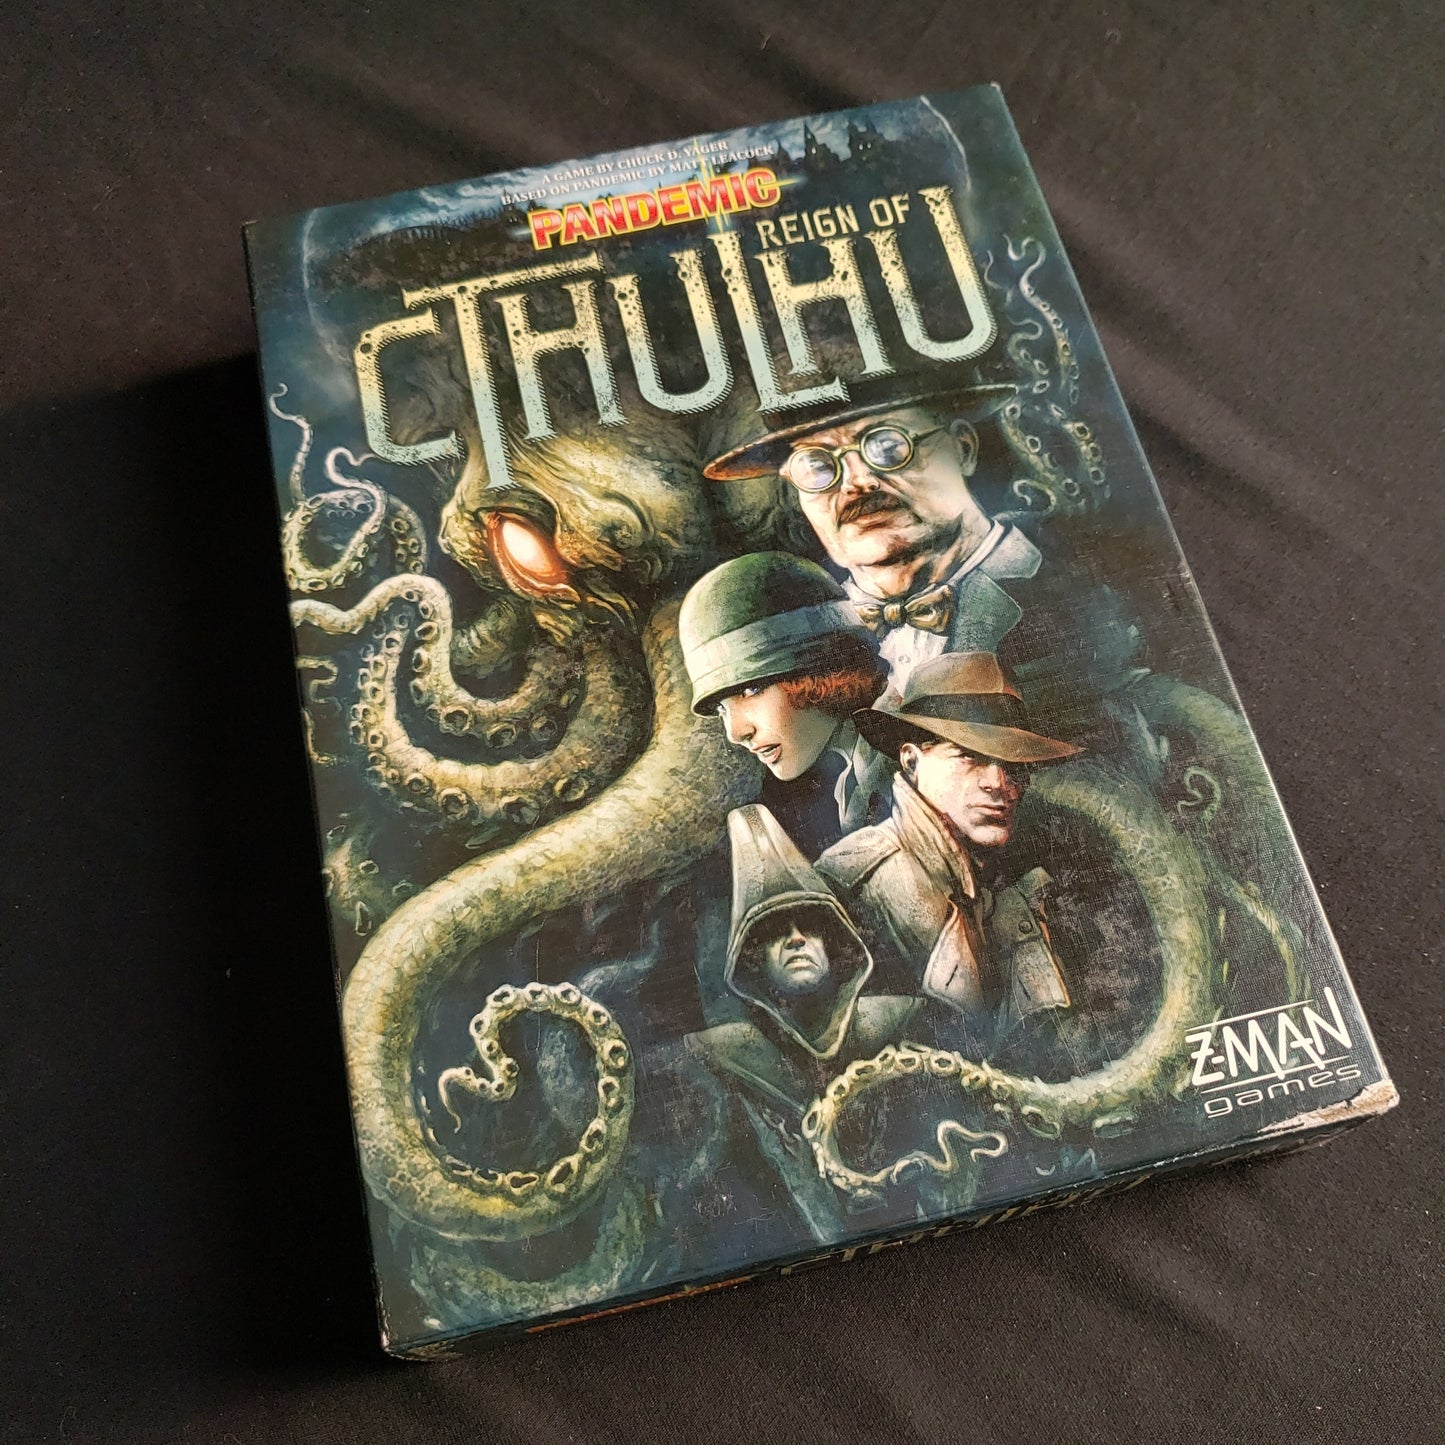 Image shows the front cover of the box of the Pandemic: Reign of Cthulhu board game